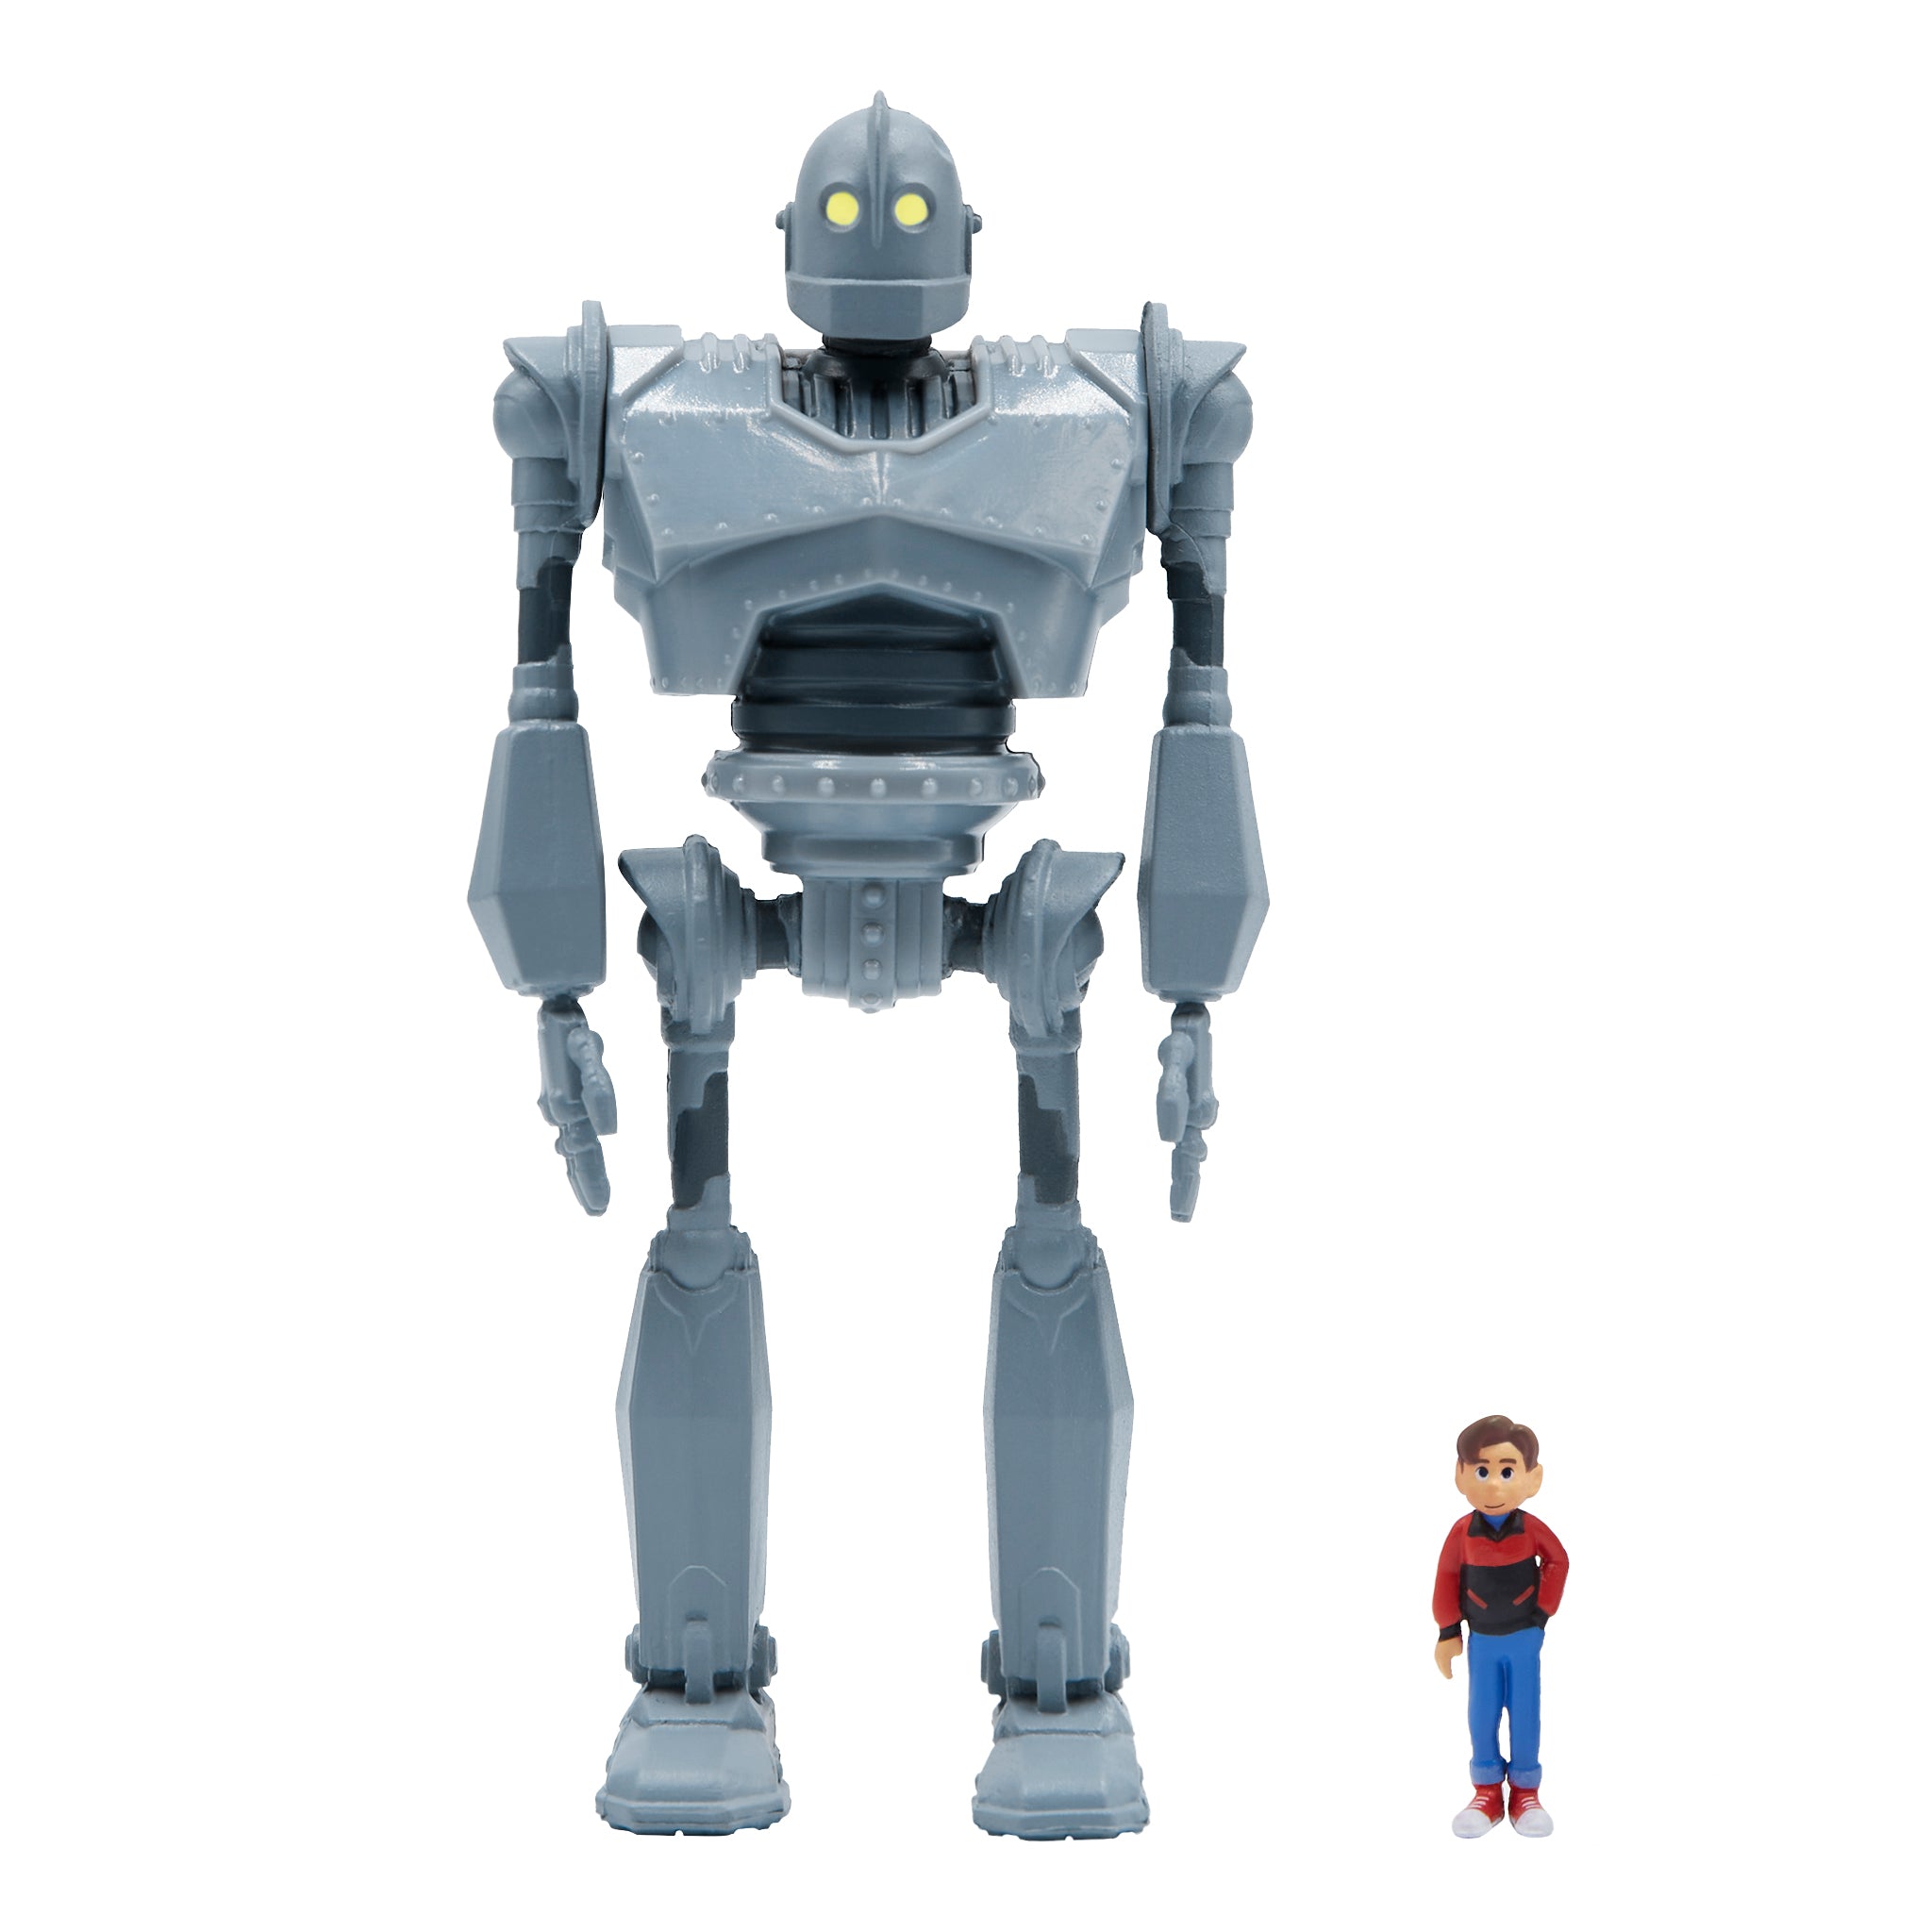 The Iron Giant ReAction Figure - The Iron Giant (with Hogarth Hughes)